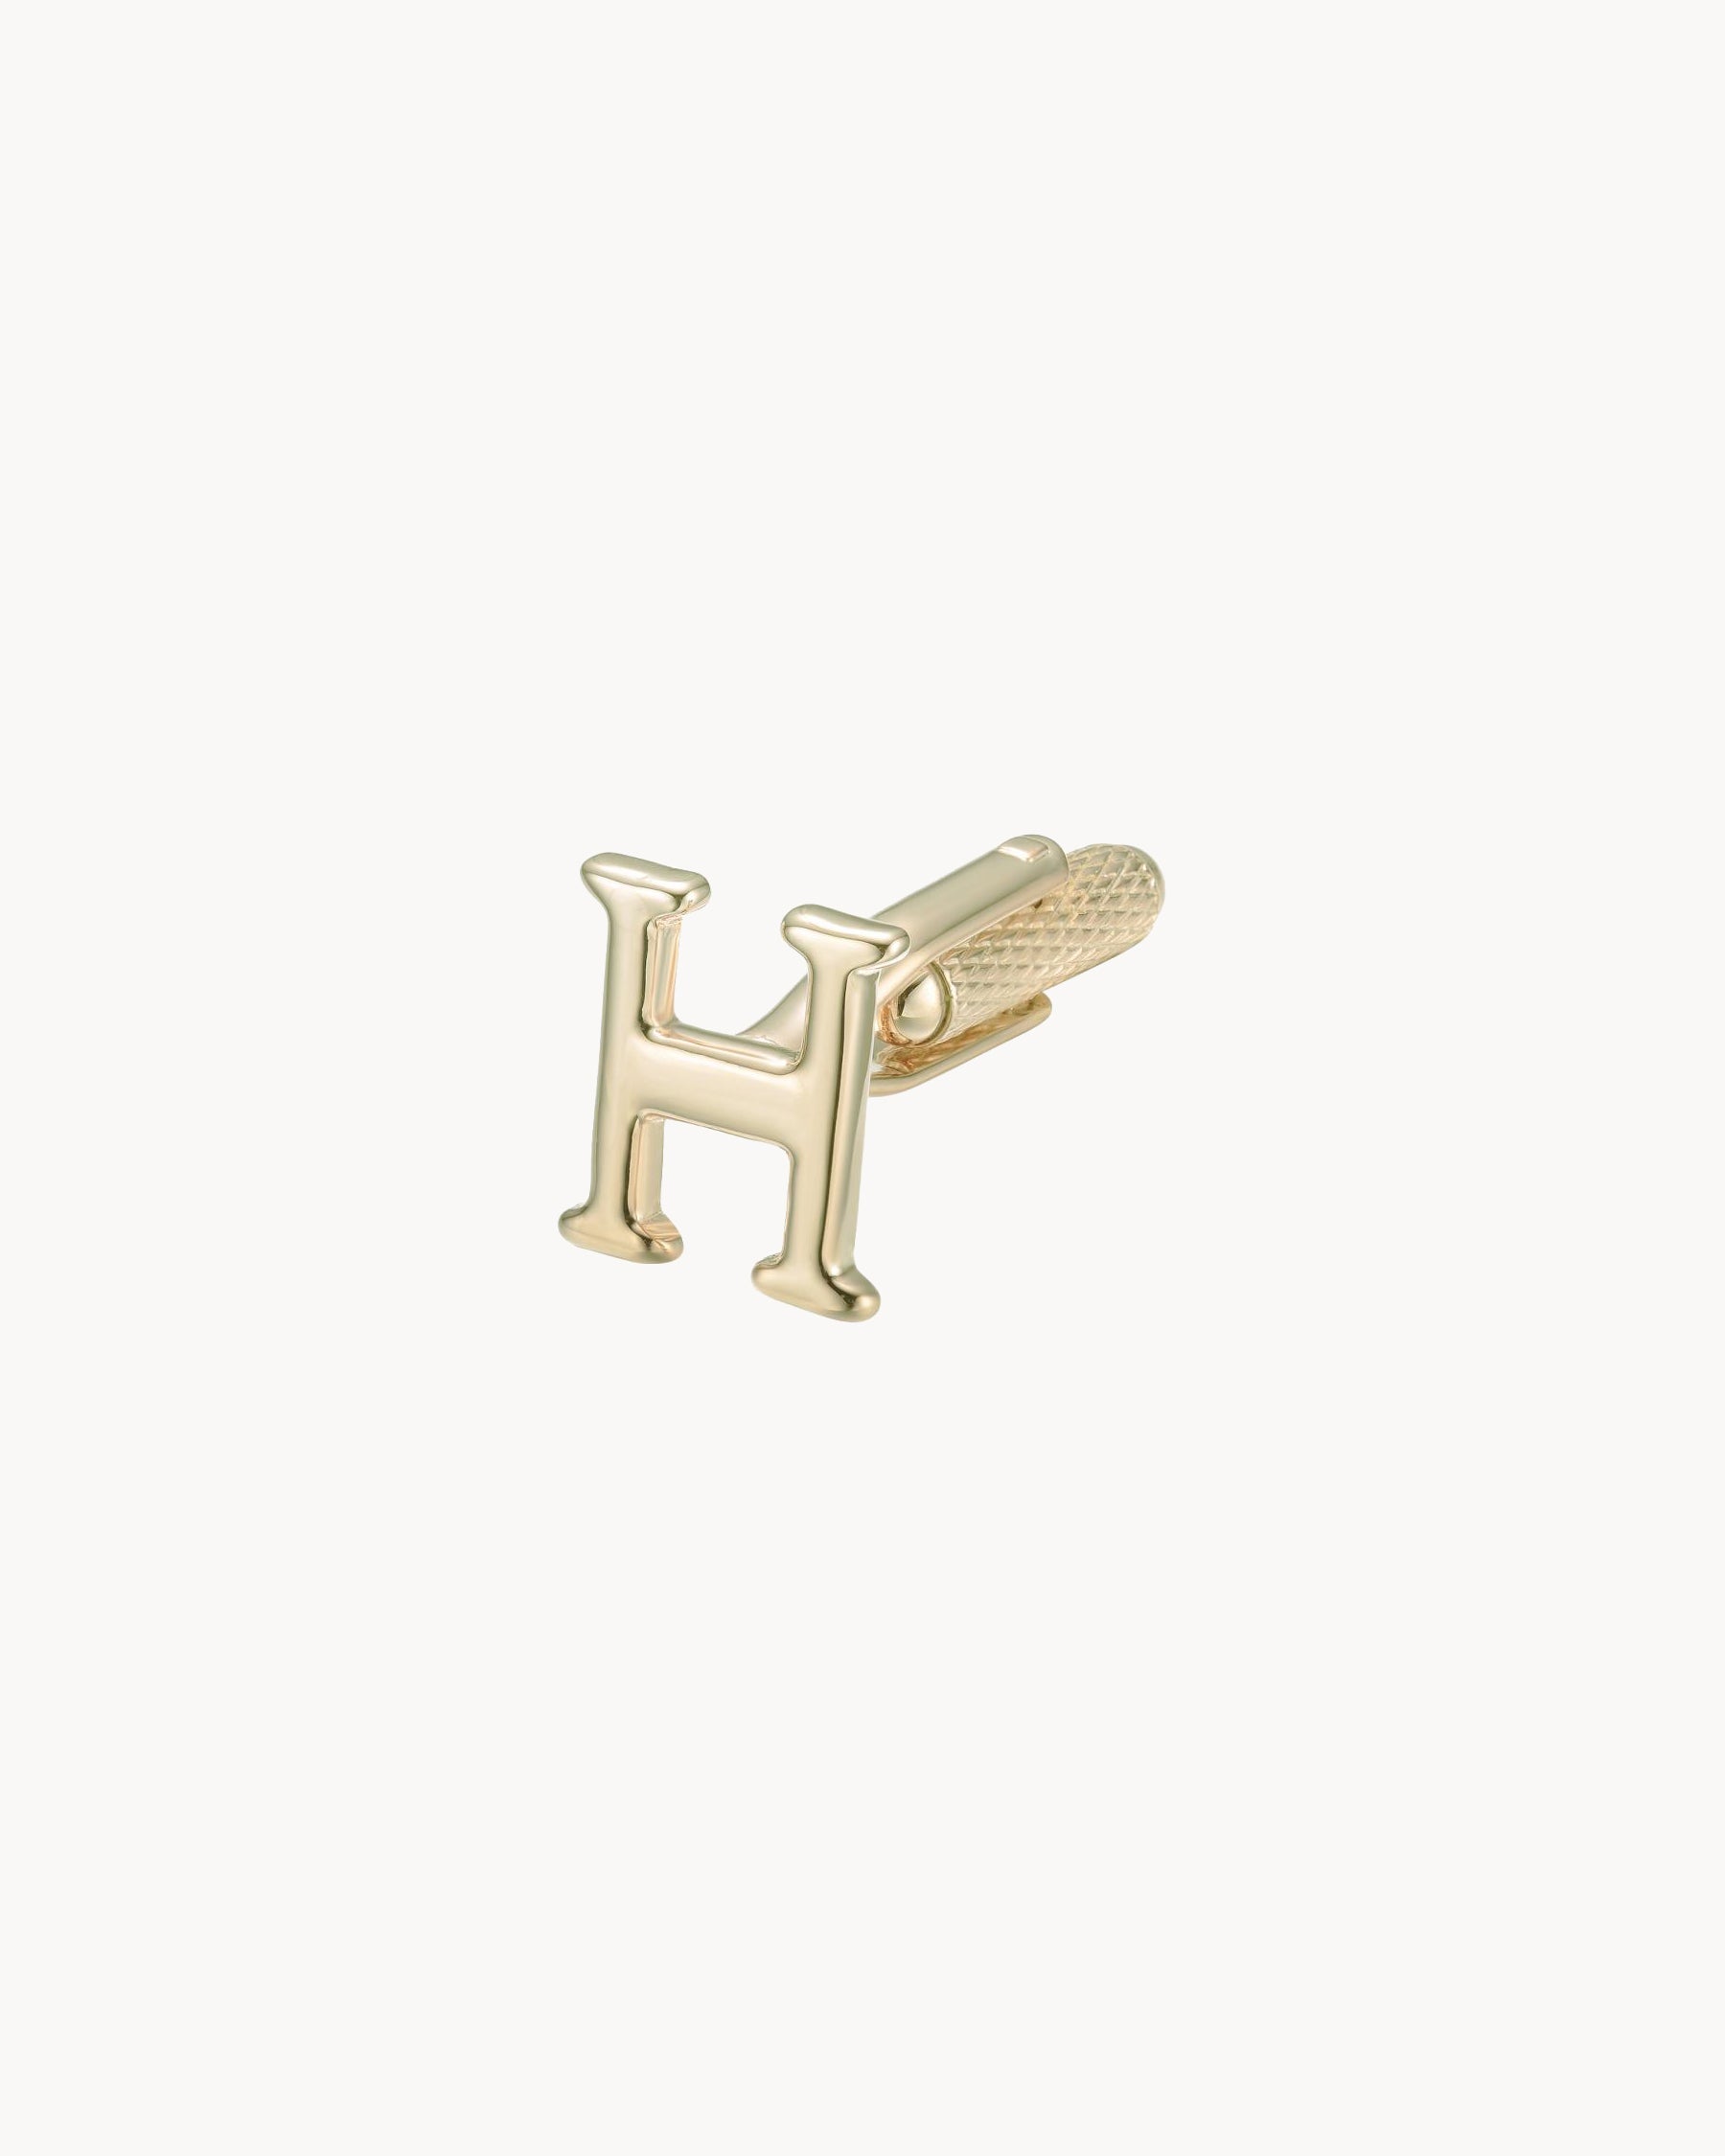 Cufflink Letter H | The Gray Box